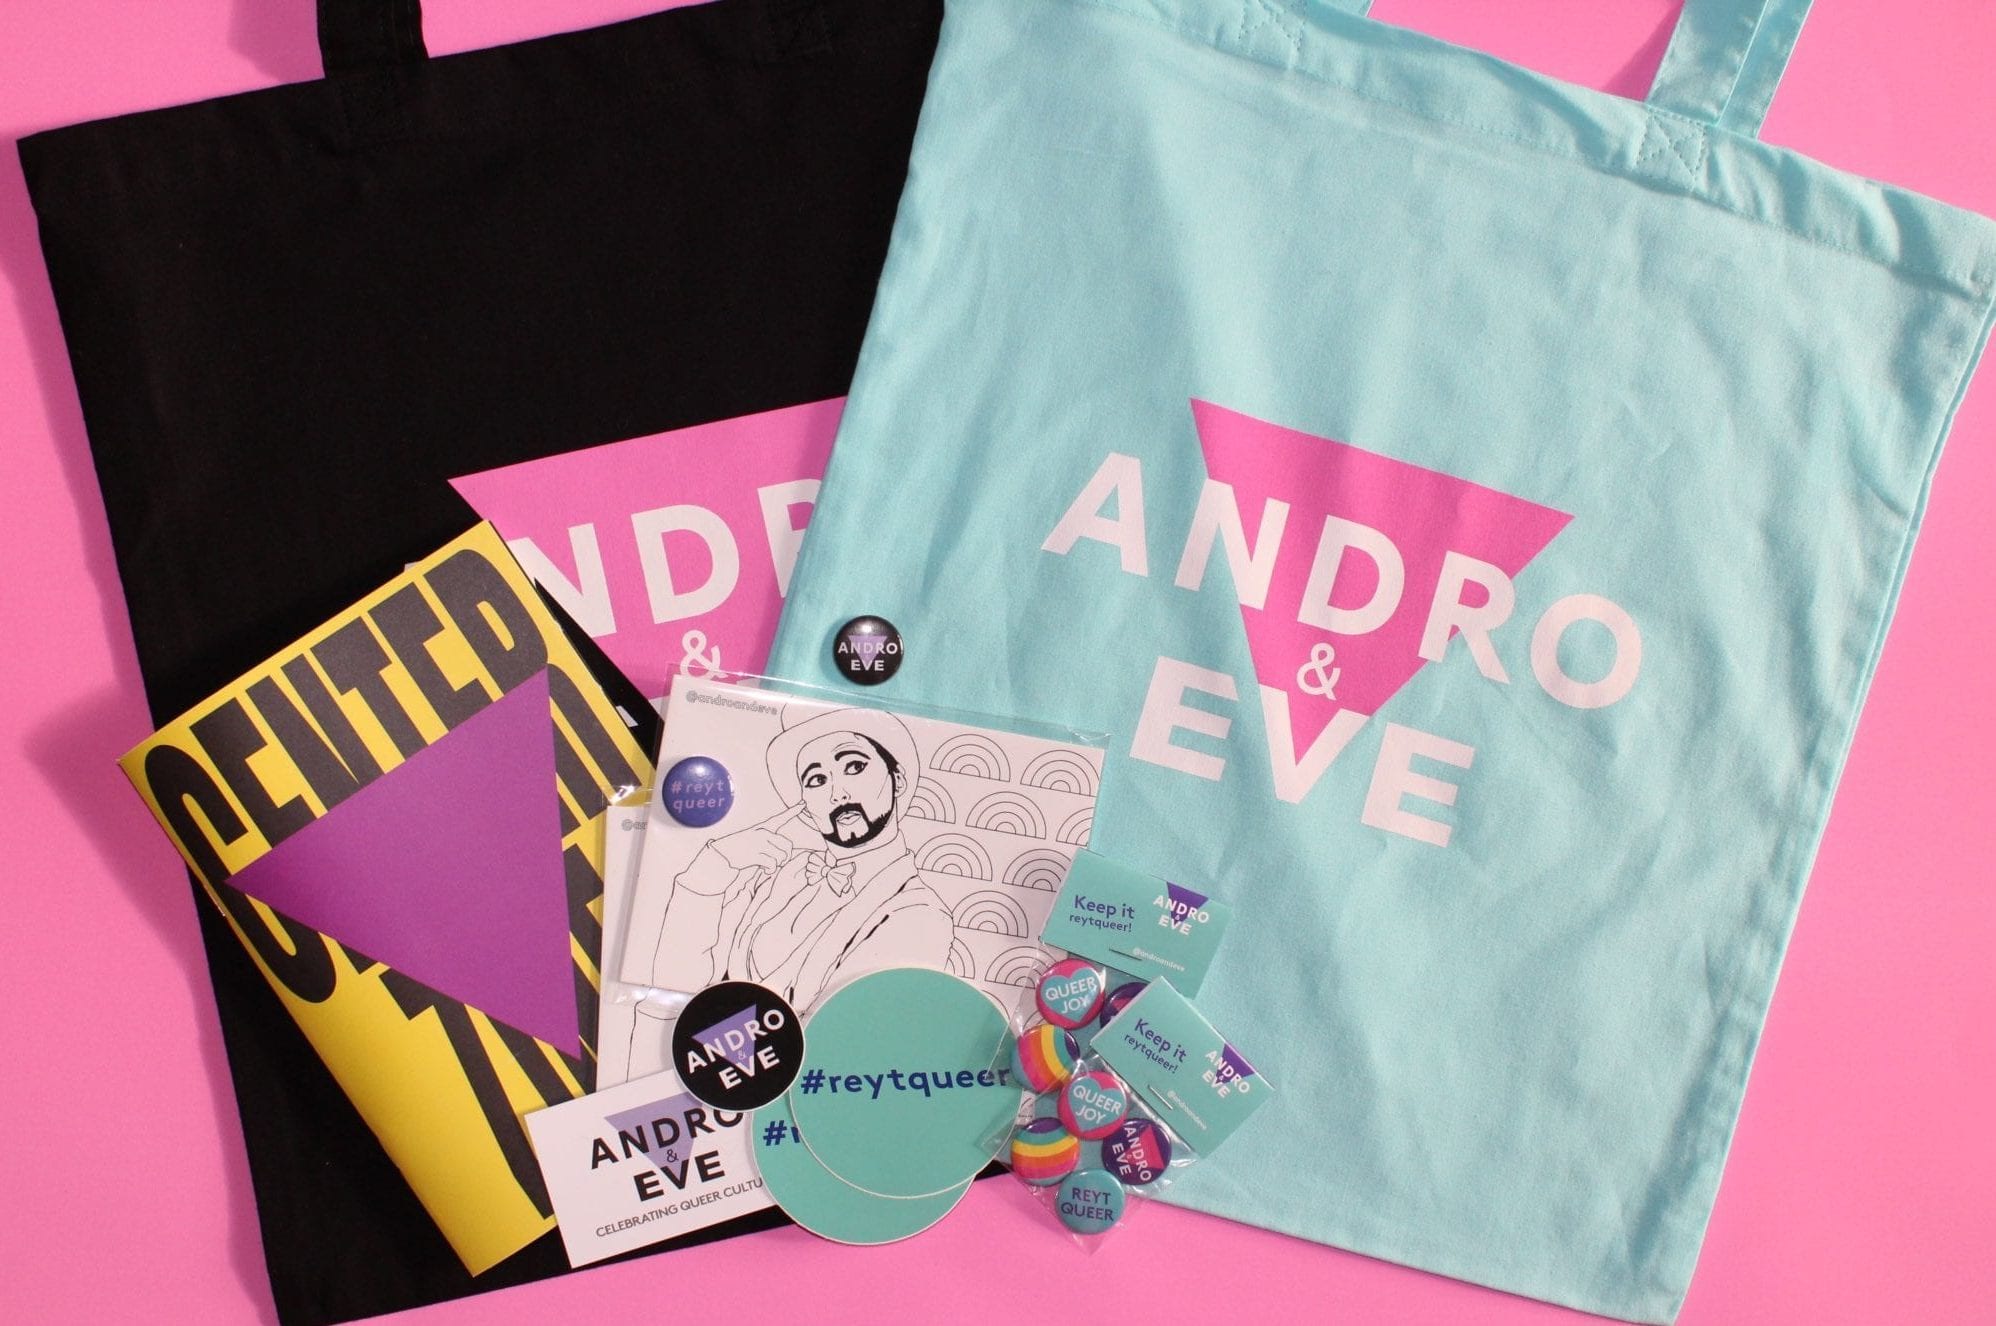 A turquoise and black cotton tote bag featuring the Andro and Eve logo sits underneath a pile of Andro and Eve merchandise. Including postcards, stickers and badges.